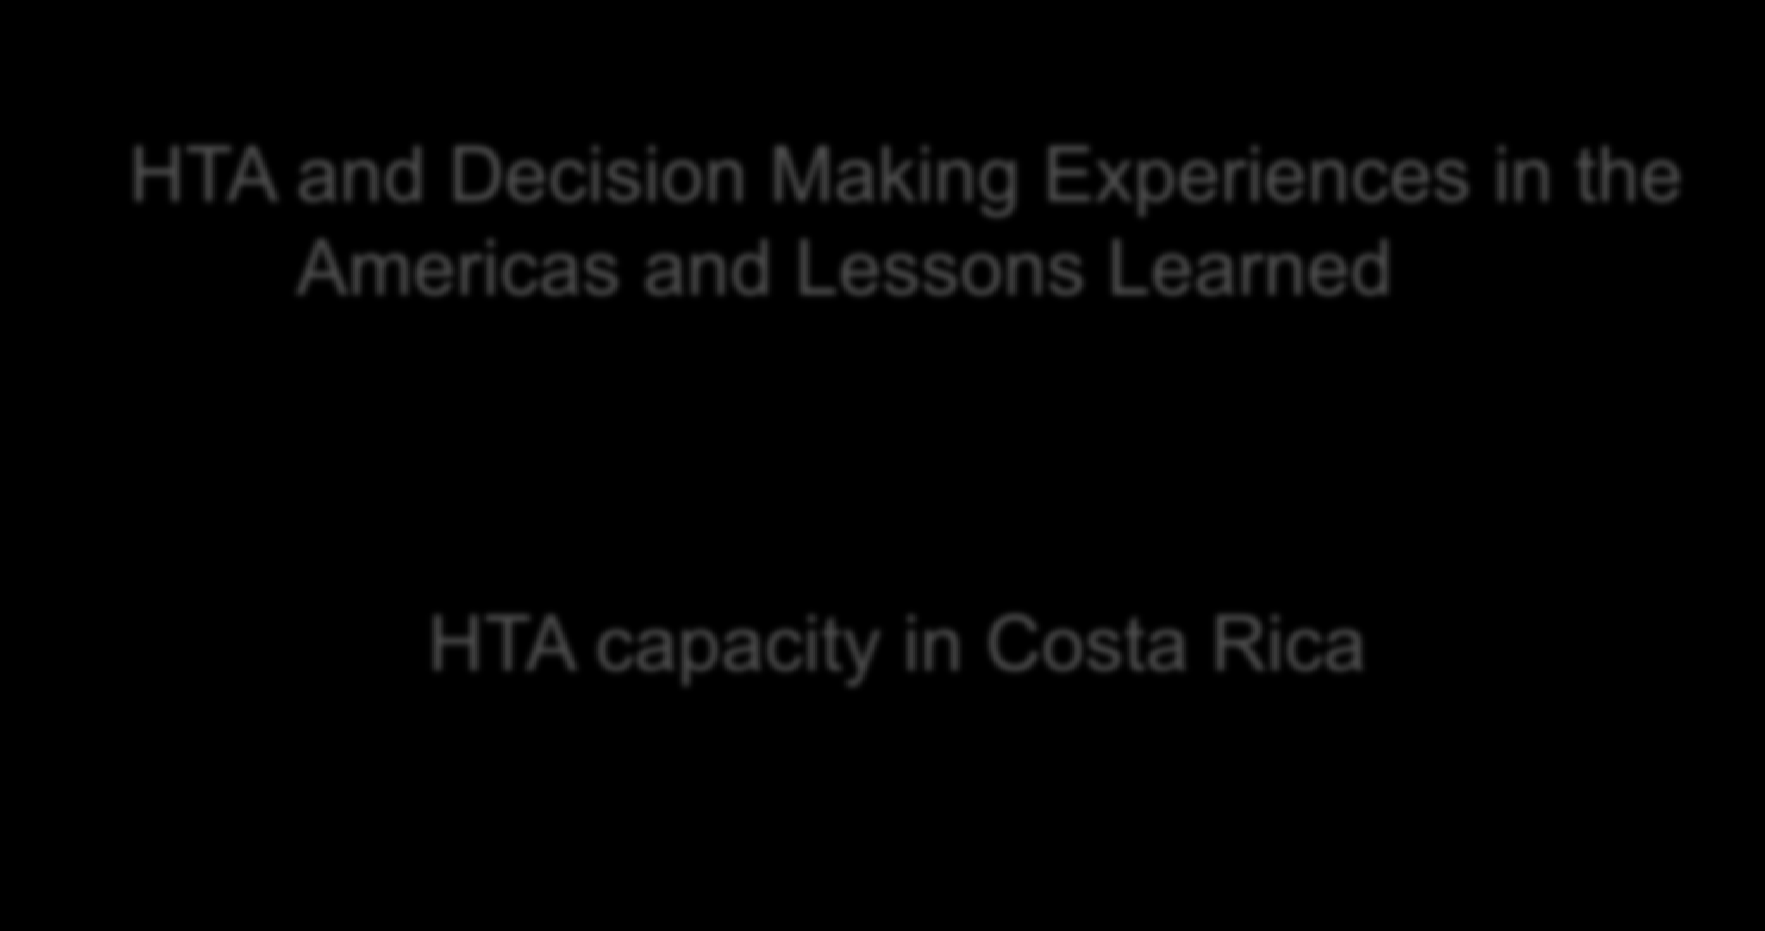 HTA and Decision Making Experiences in the Americas and Lessons Learned HTA capacity in